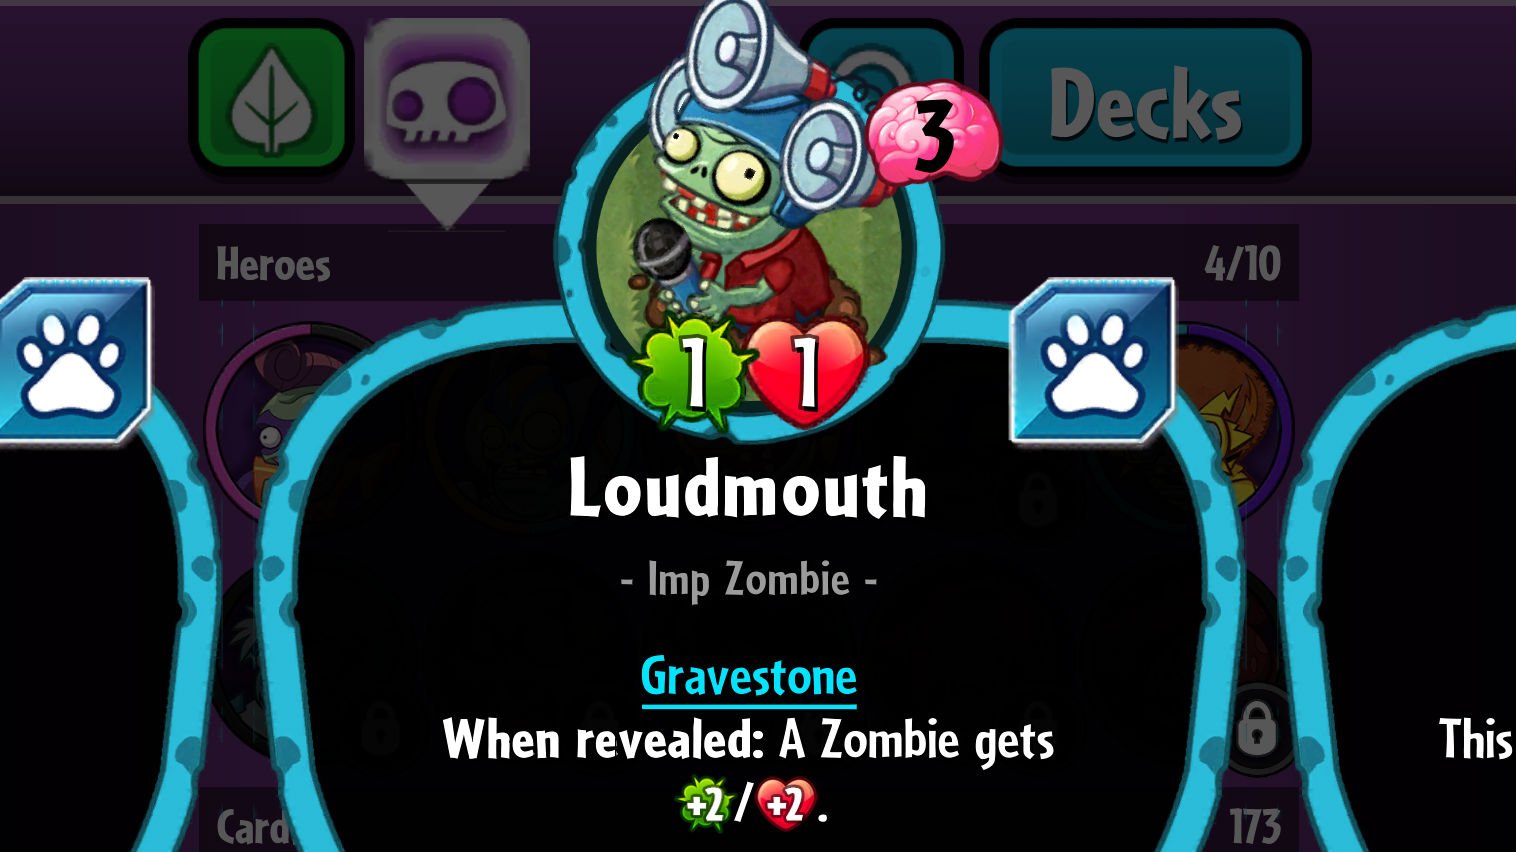 Plants vs. Zombies Heroes Loudmouth